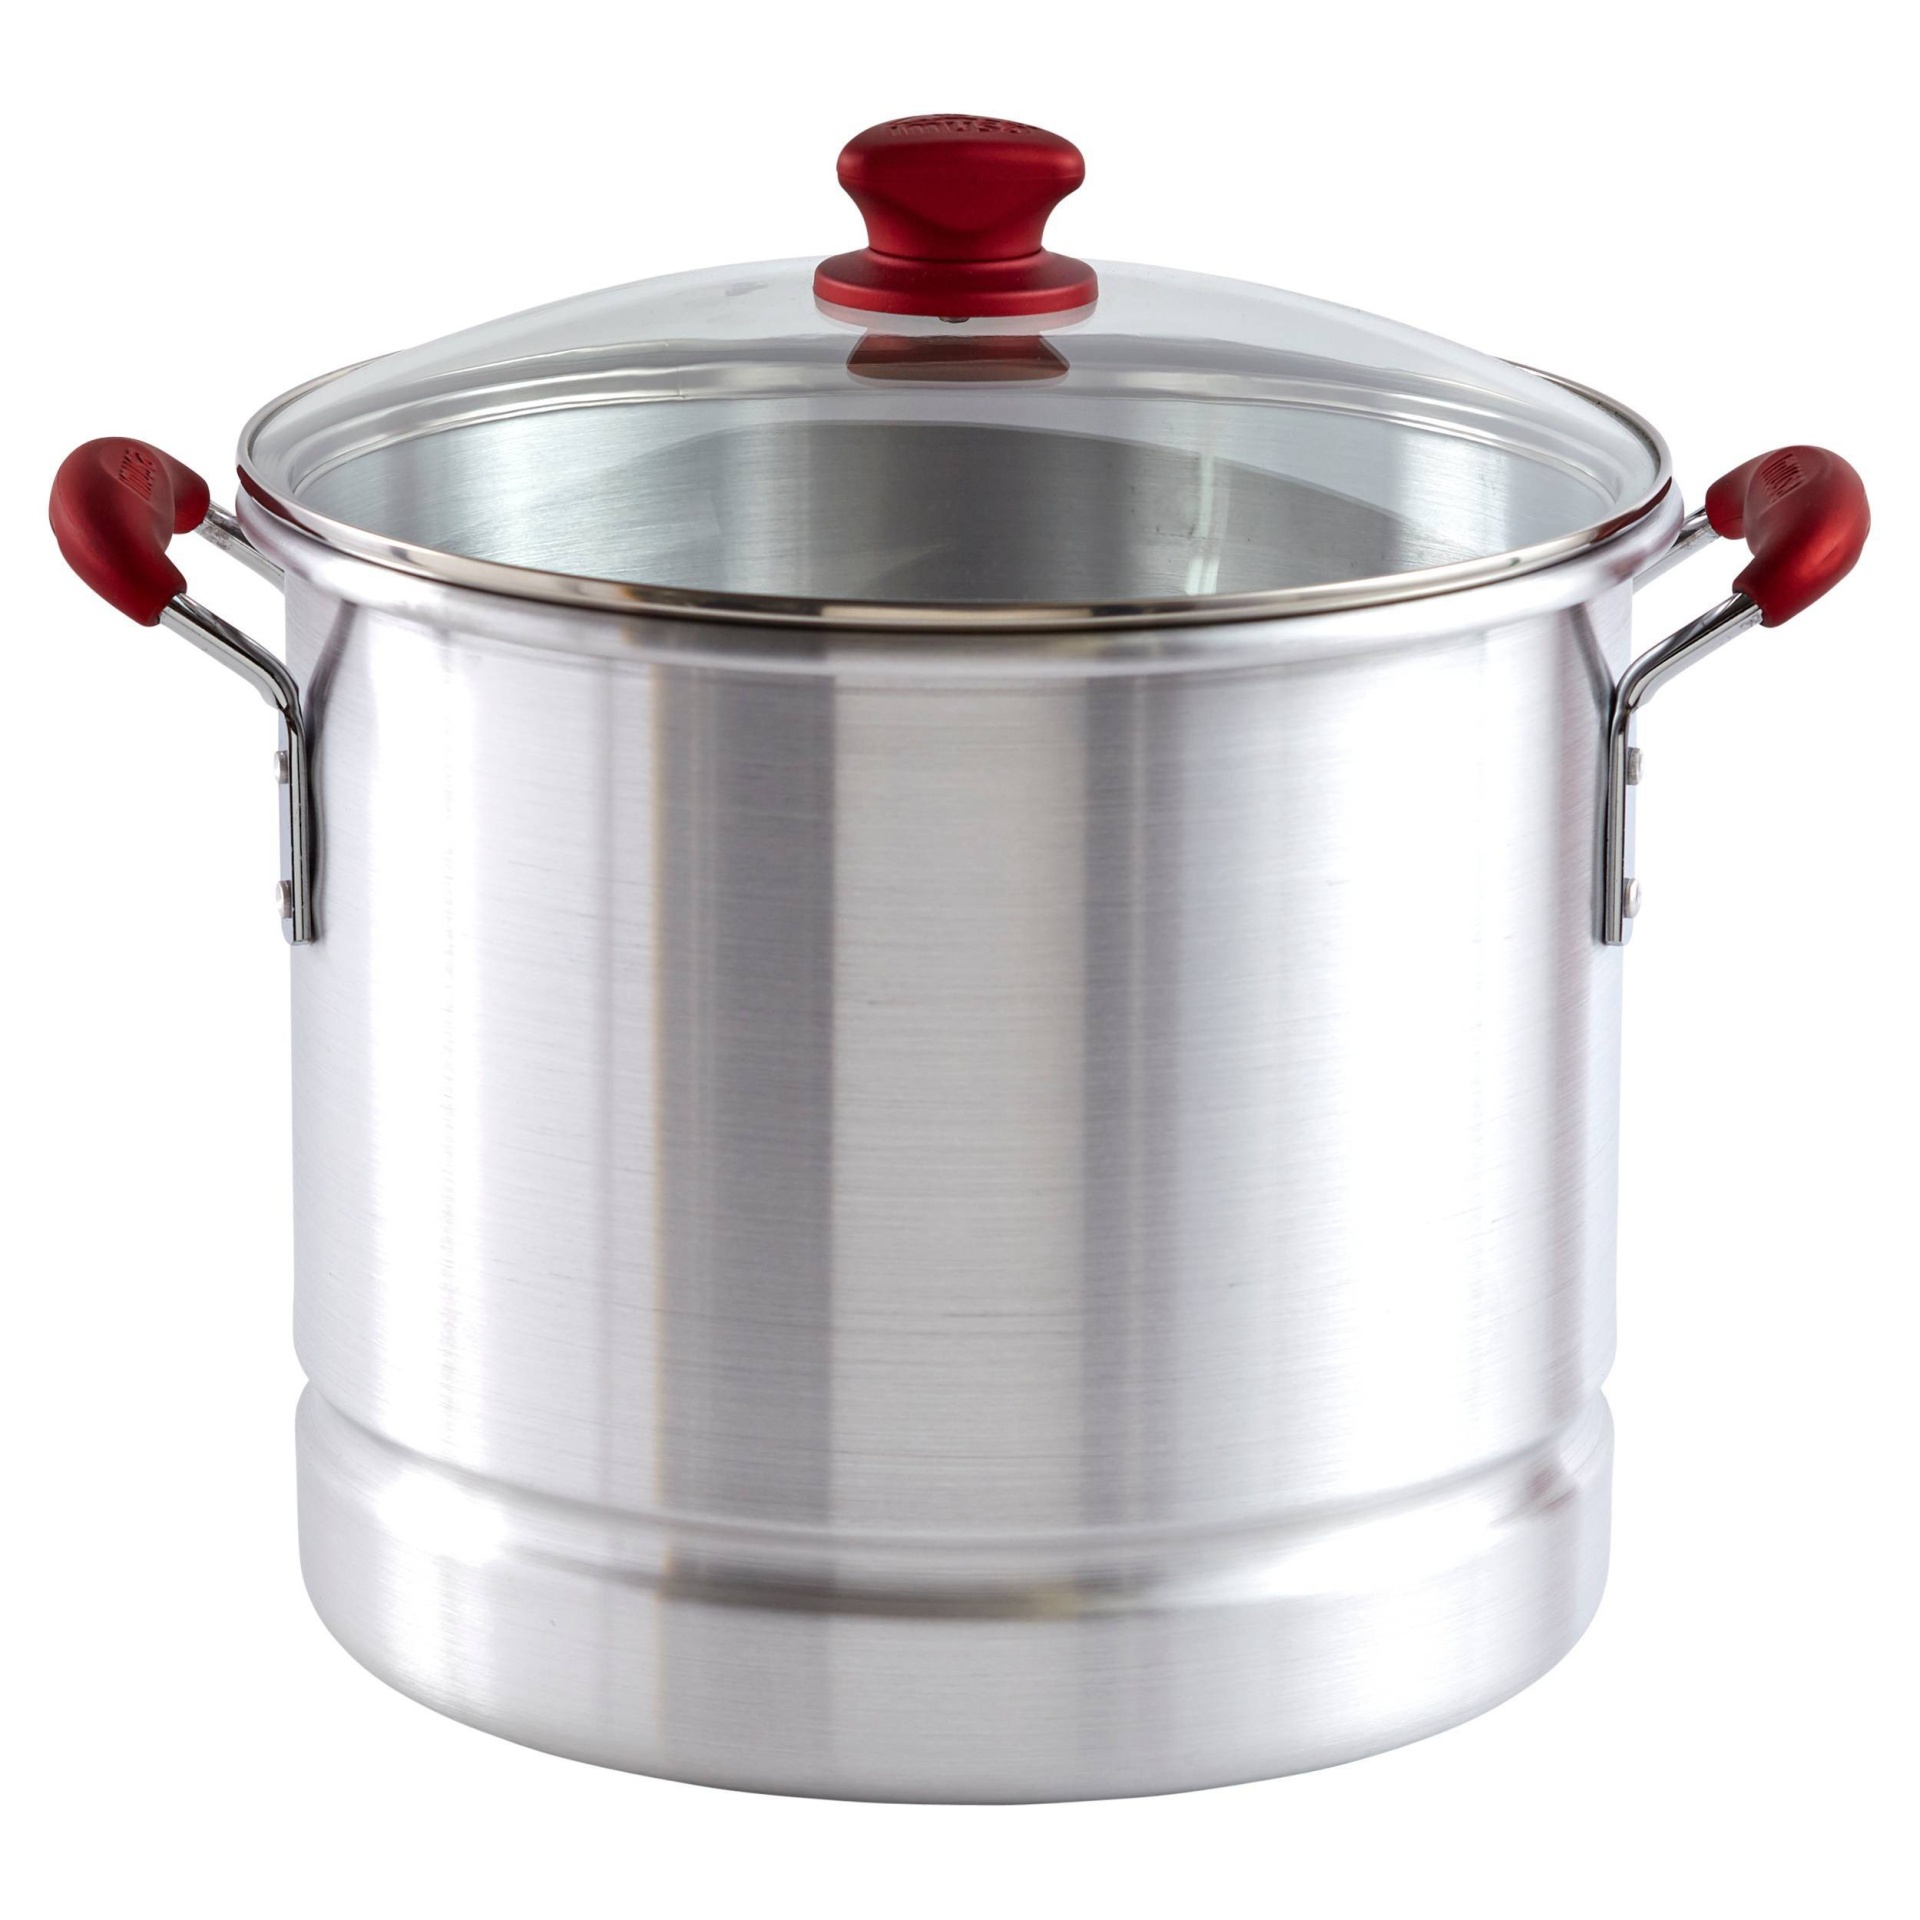 IMUSA 20qt Tamale Steamer with Ruby Red Handle 1 ct